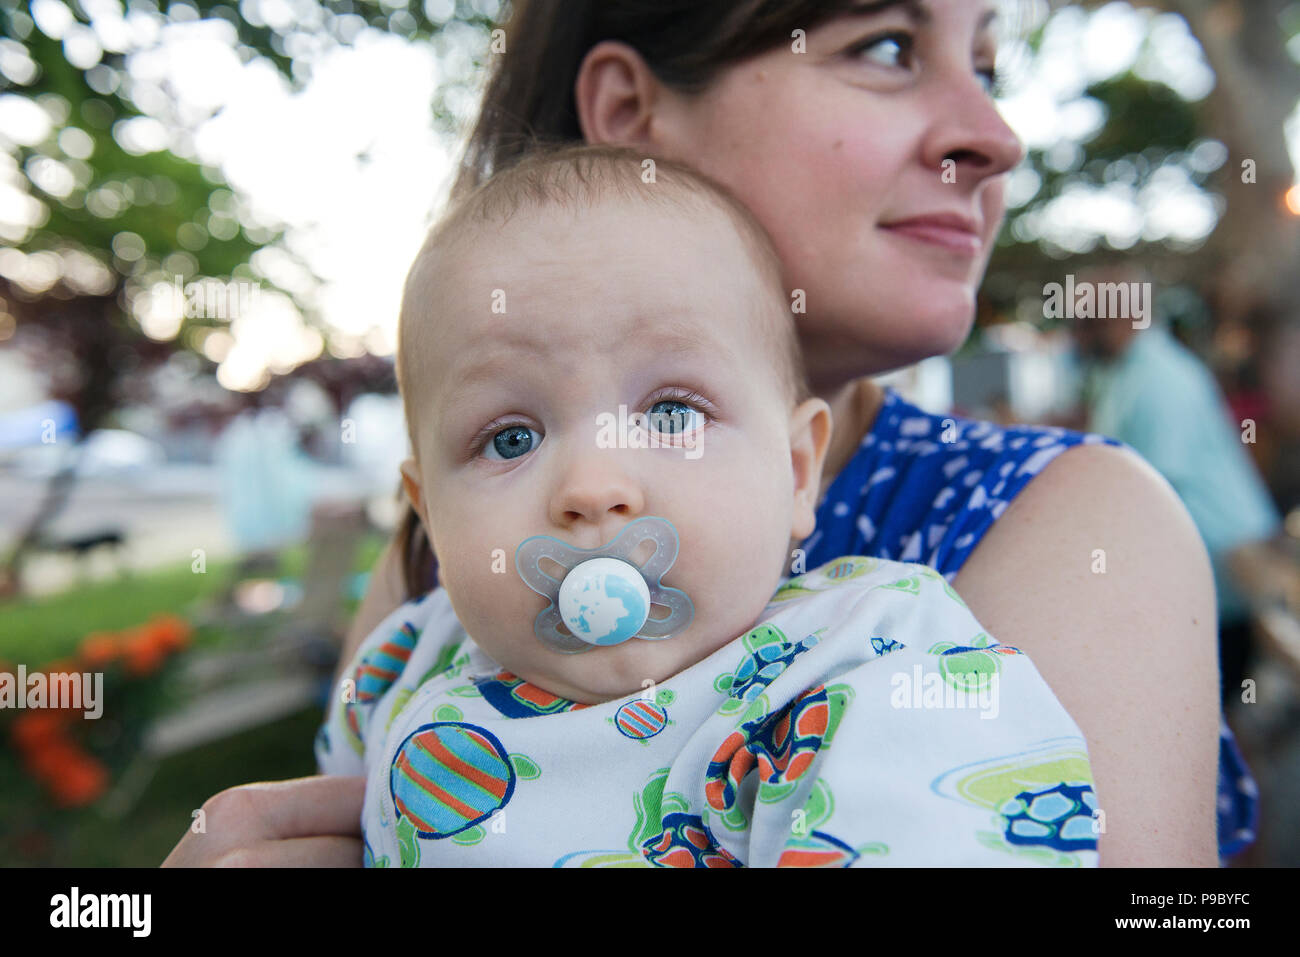 A baby with a pacifier. Stock Photo